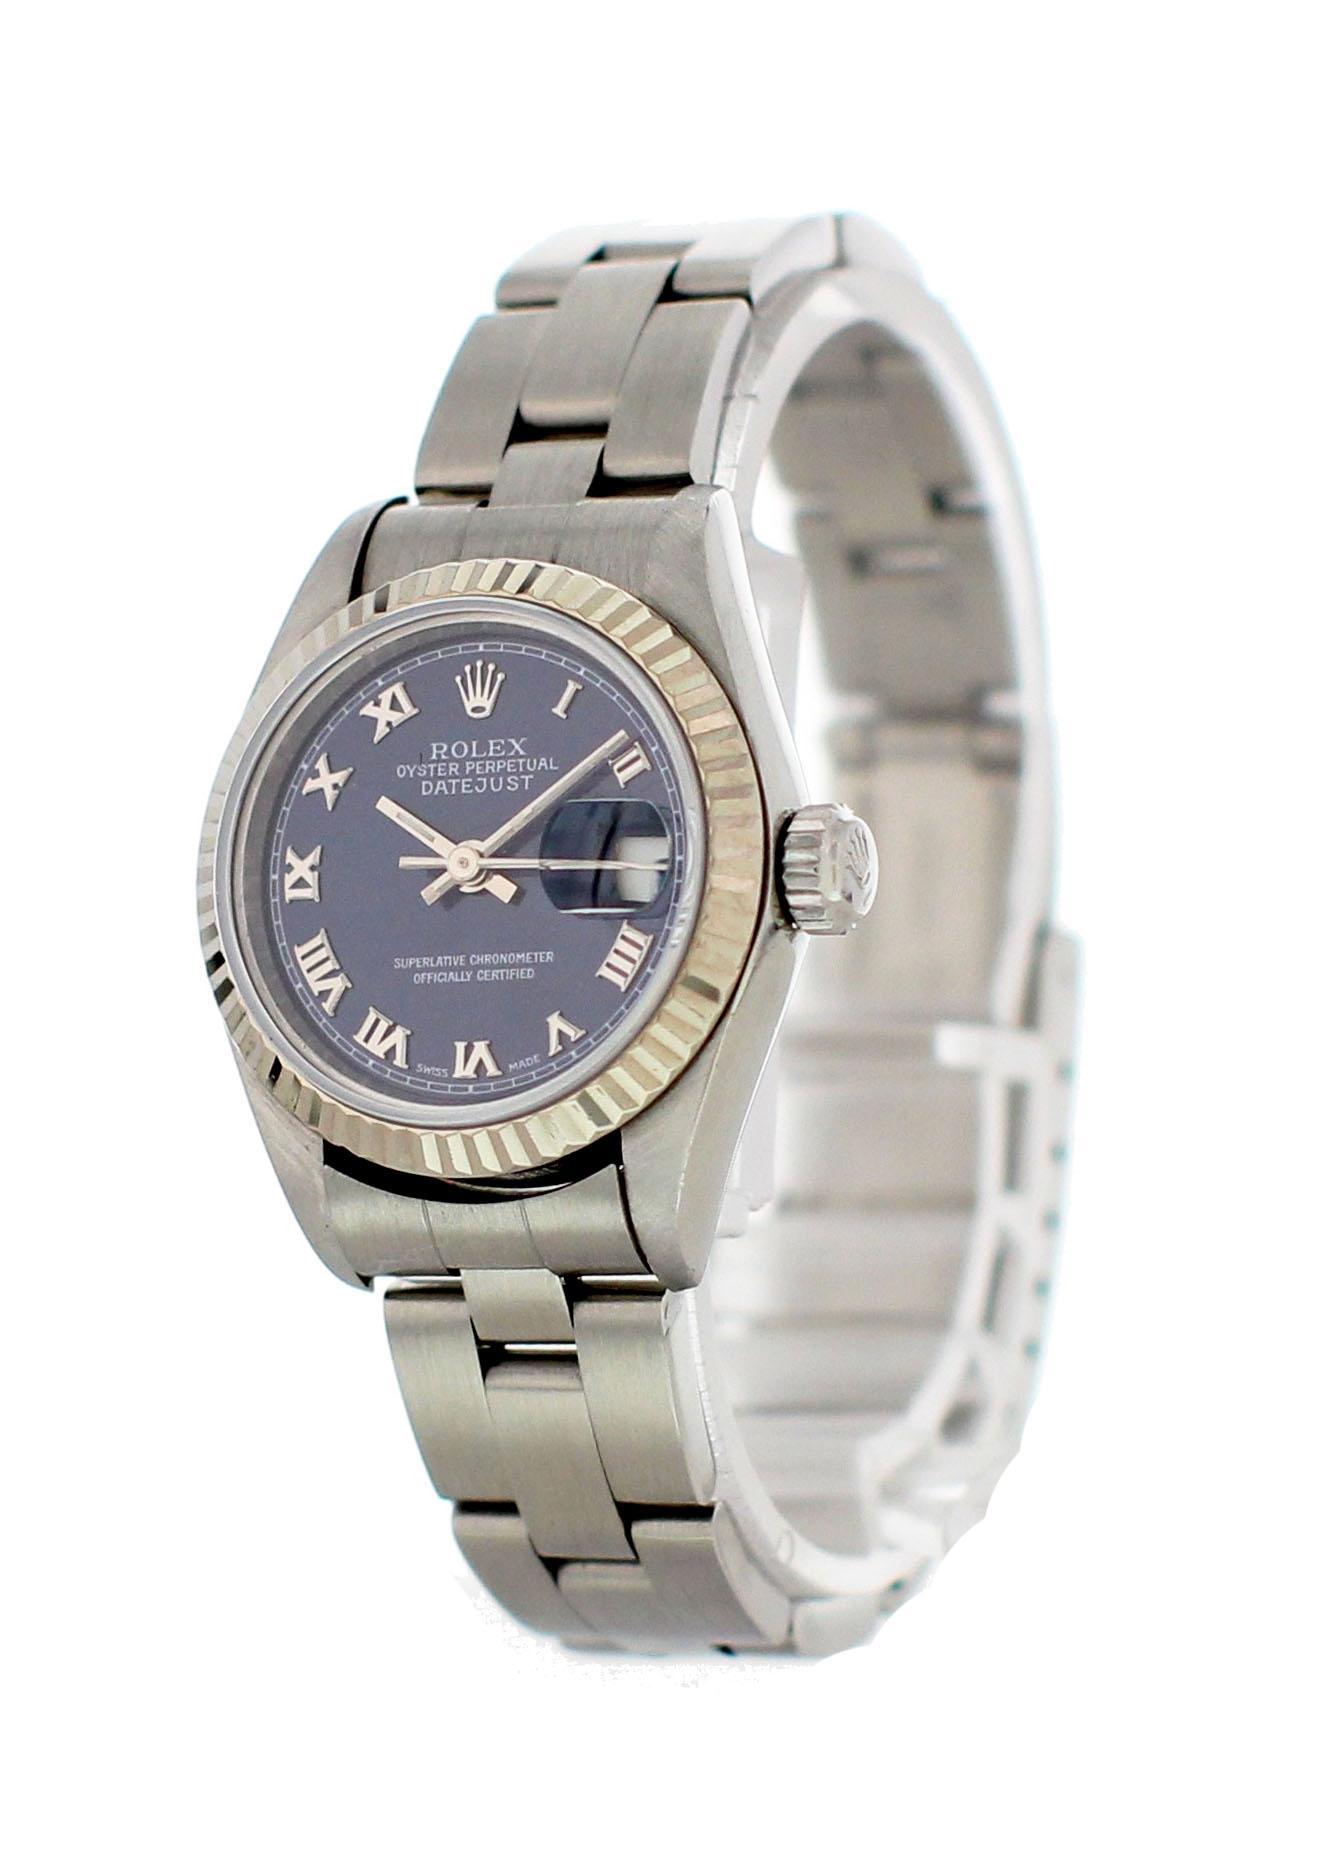 Rolex Oyster Perpetual Datejust 69174 Ladies Watch. 26mm stainless steel case. 18k white gold fluted bezel. Blue dial with steel hands and Roman numeral hands. Date Display by the 3 o'clock. Stainless steel oyster band. Will fit up to a 6-inch